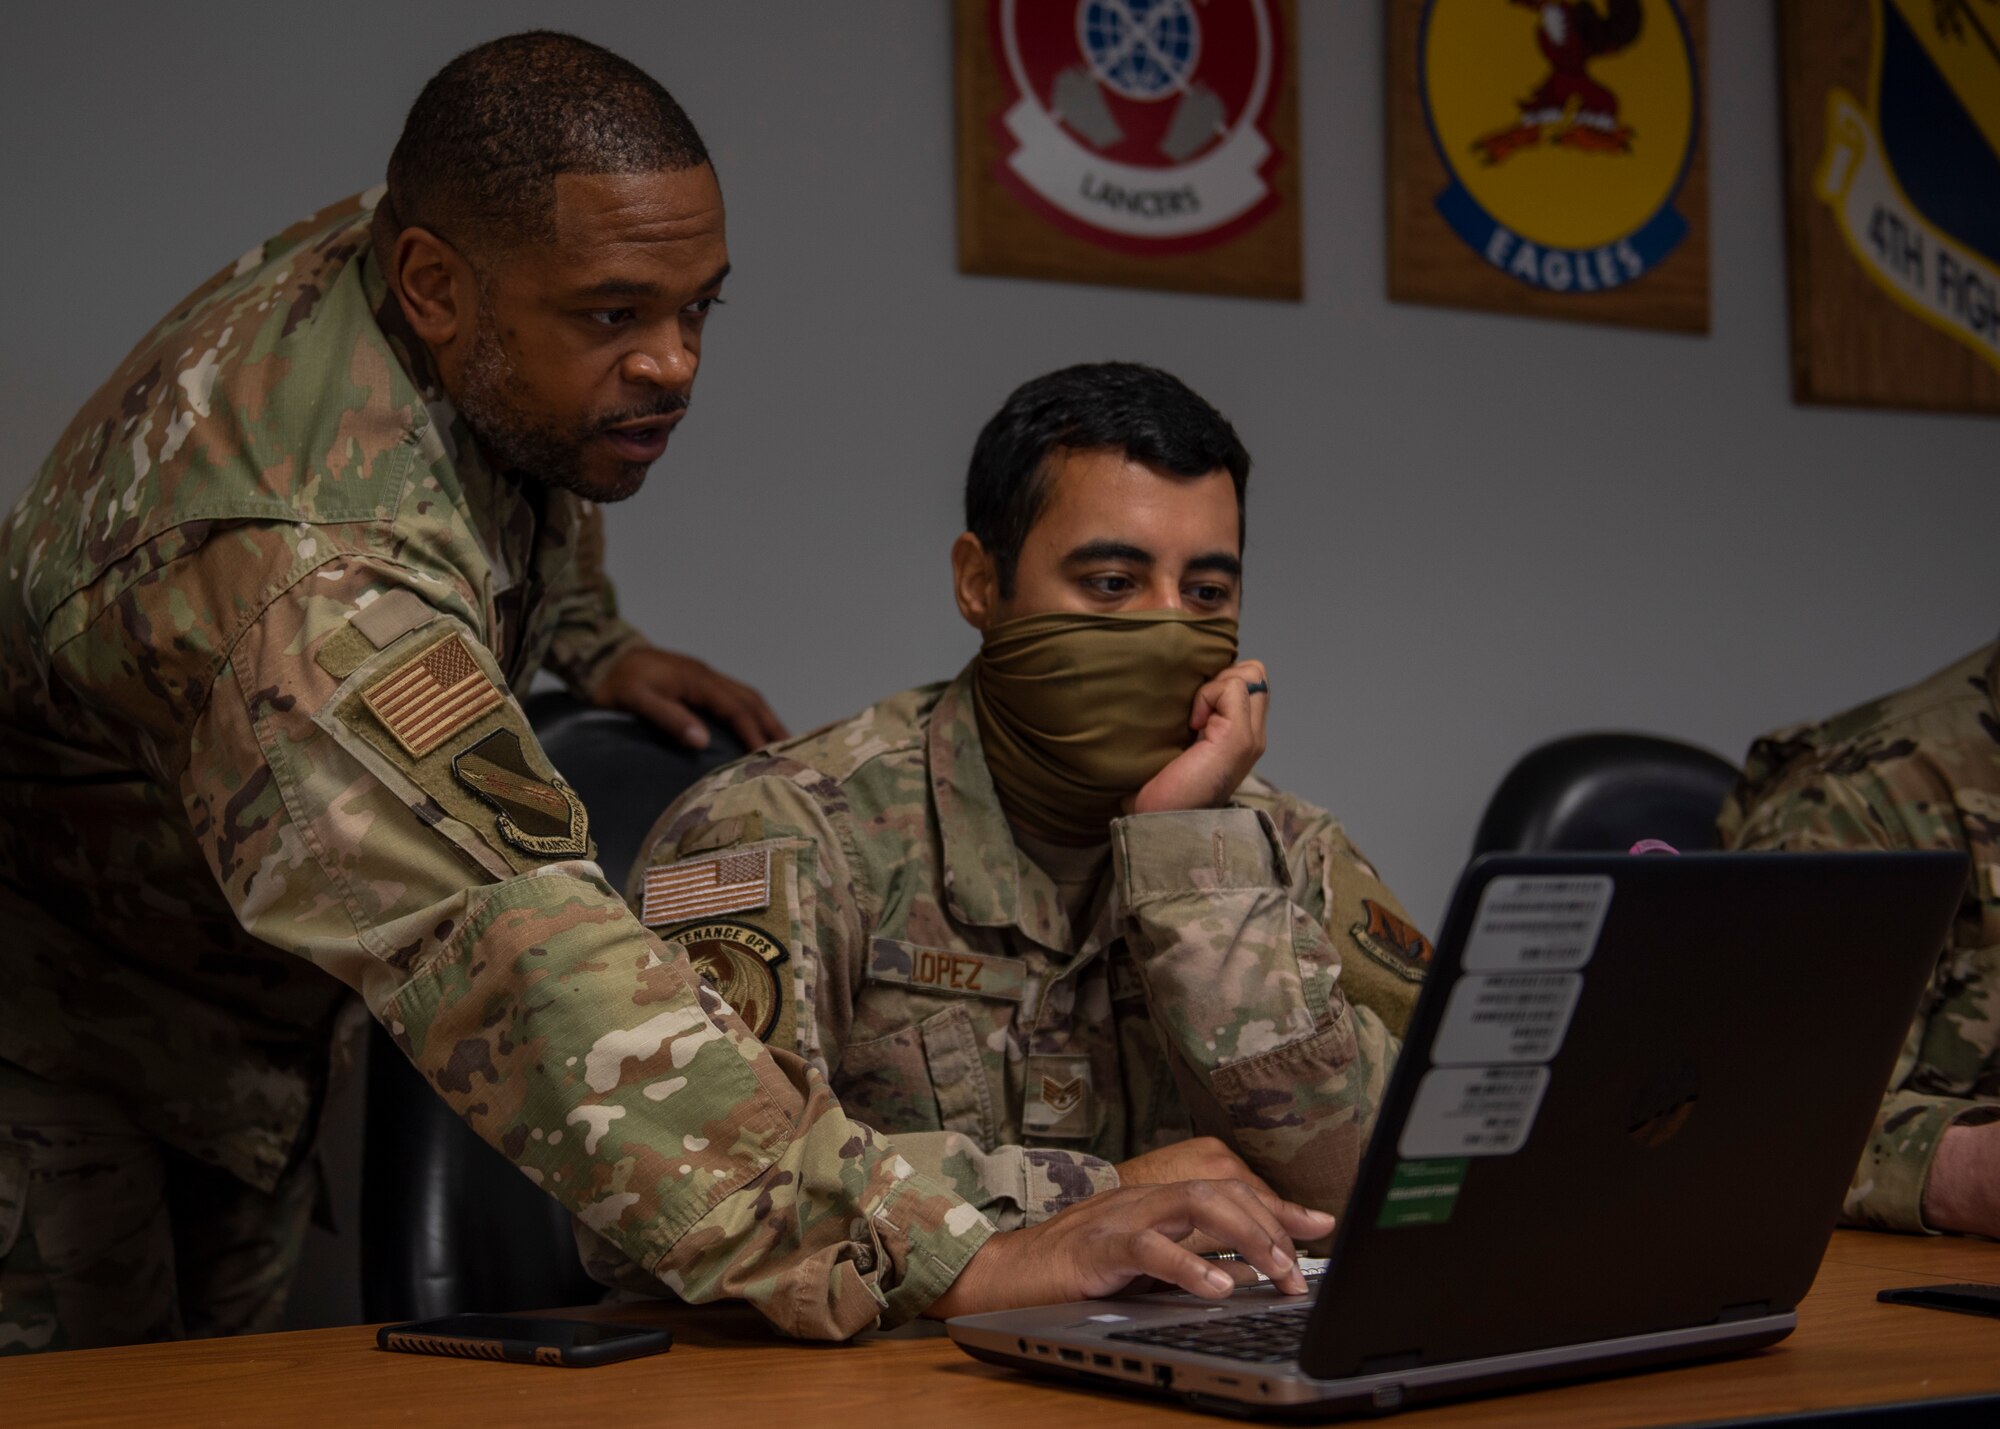 Tech Sgt. Jevon Charles, 4th Fighter Readiness Squadron weapons academic instructor (left), teaches Staff Sgt. George Lopez, 4 FRS aircraft maintenance qualifications program instructor (right), how to use formulas in Microsoft Excel at Seymour Johnson Air Force Base, North Carolina, Nov. 2, 2020.